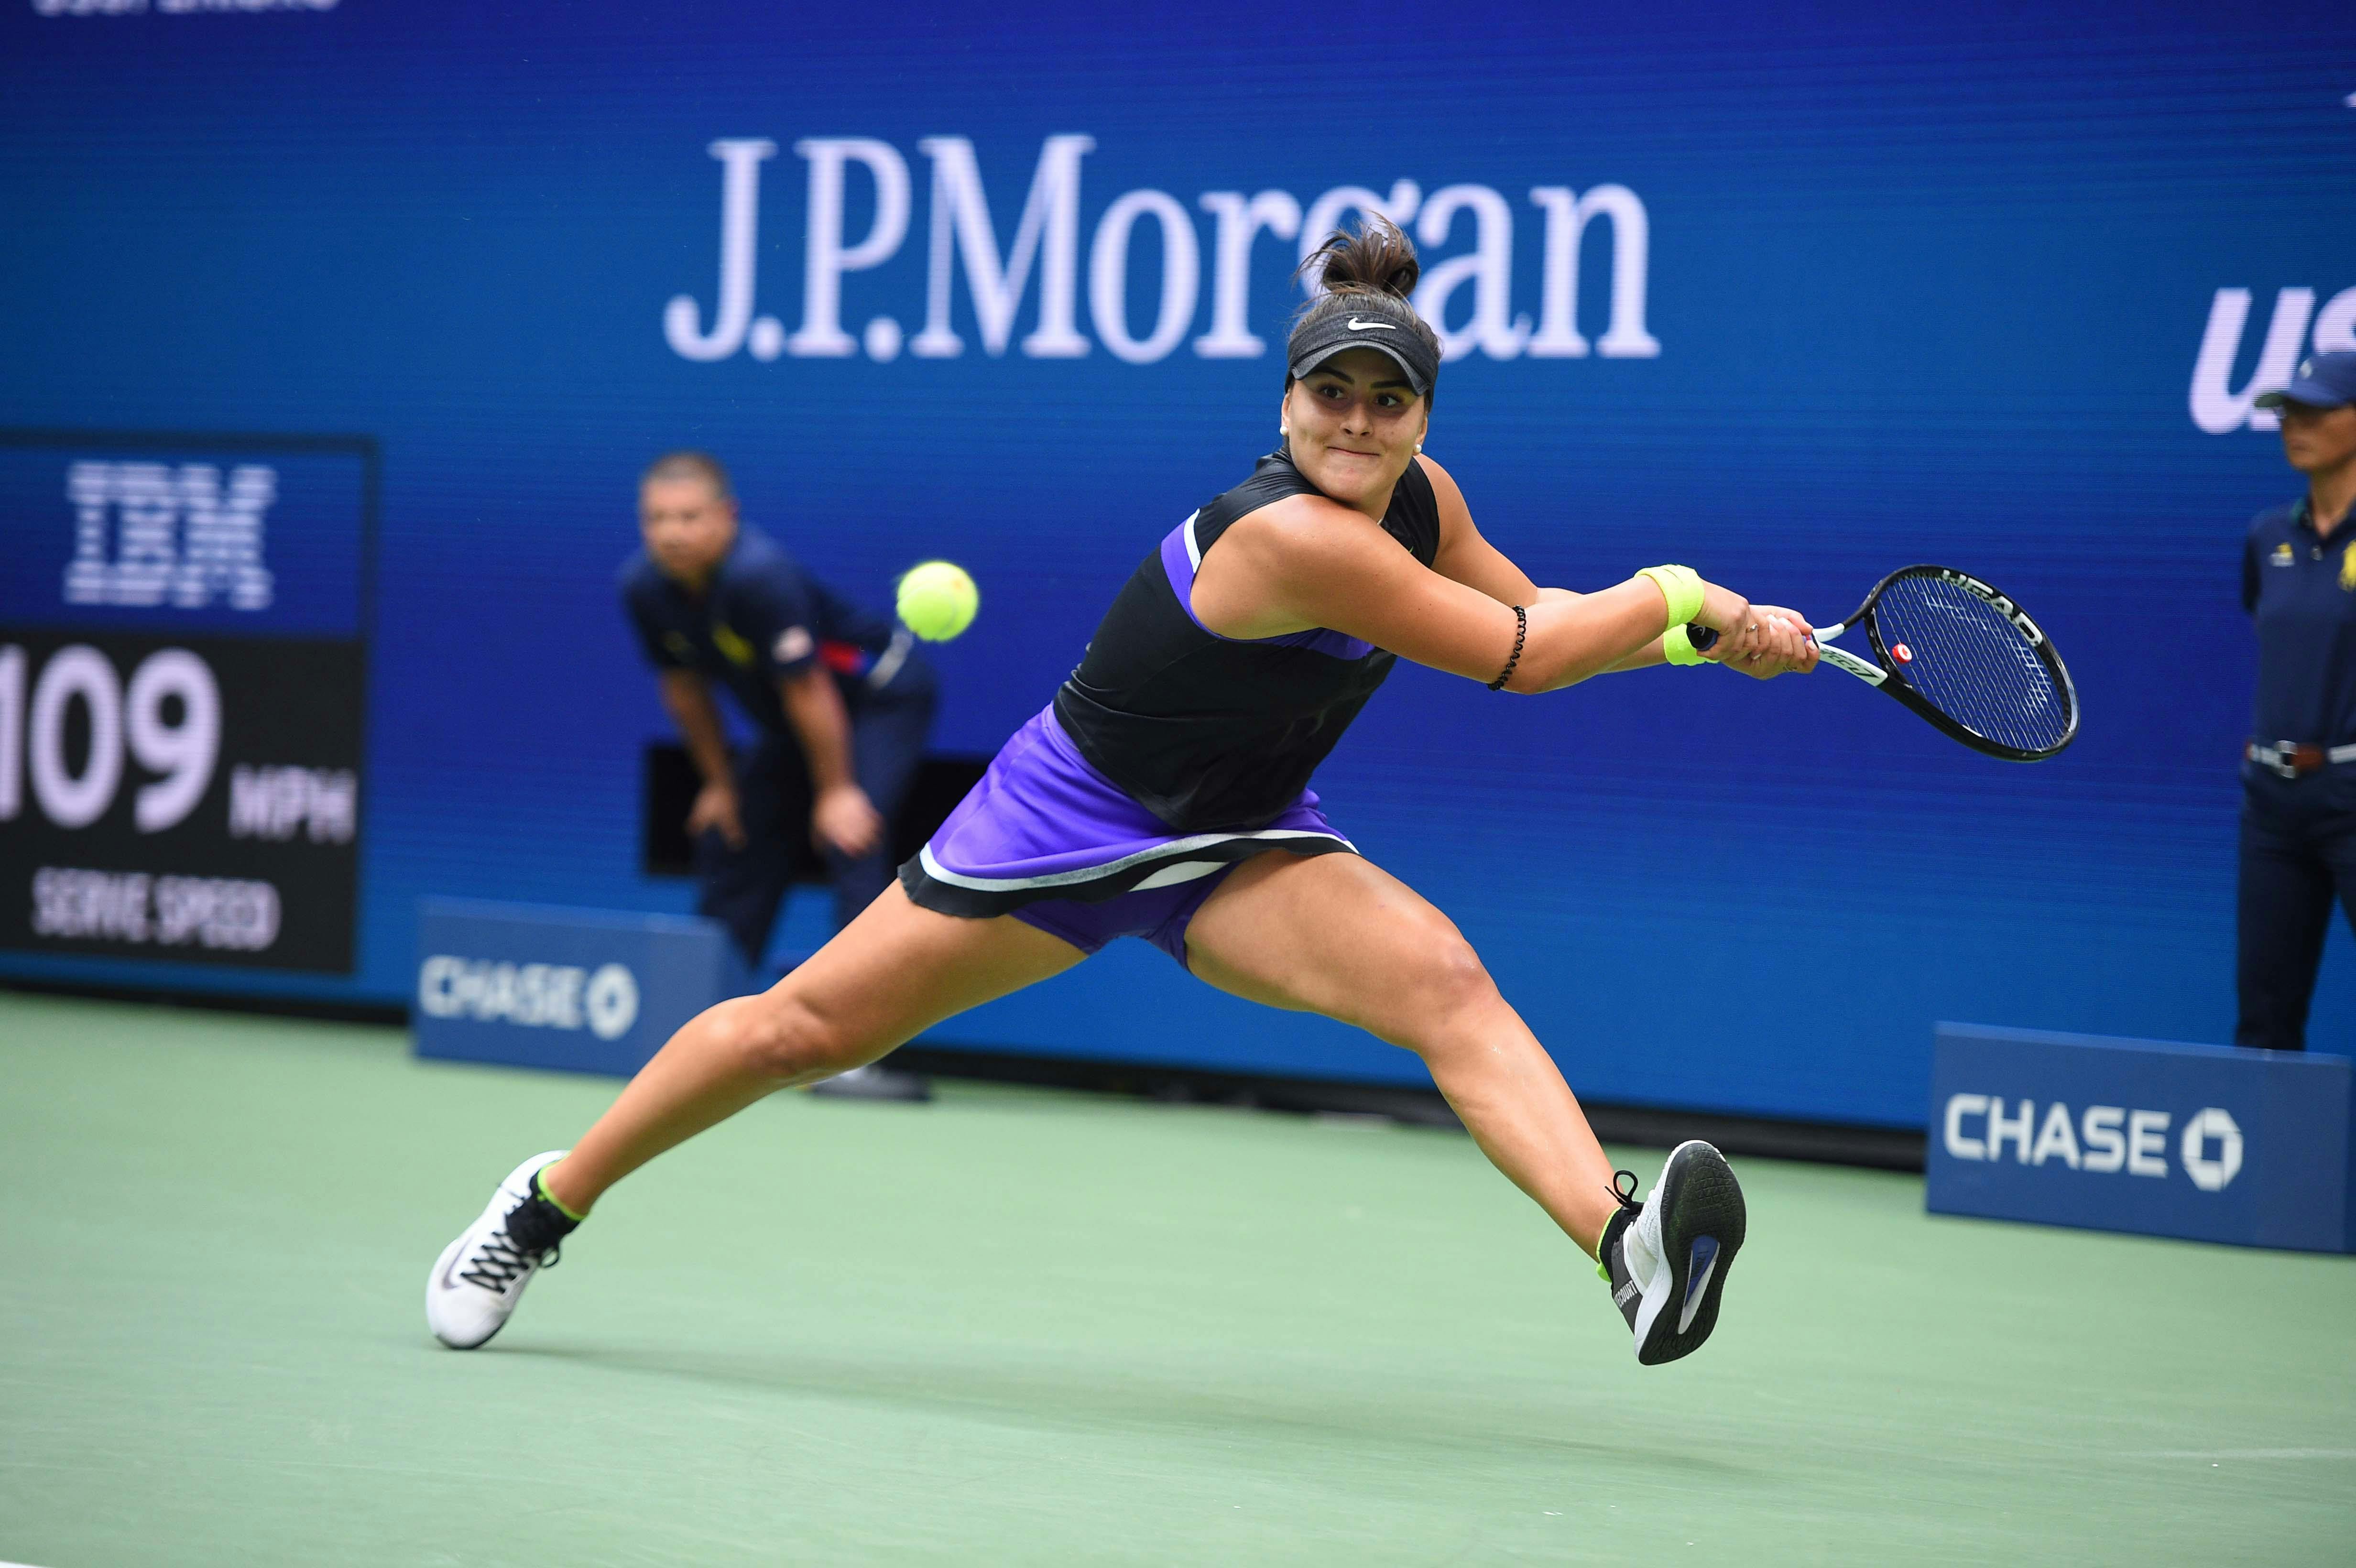 Bianca Andreescu hitting a backhand during the 2019 US Open final